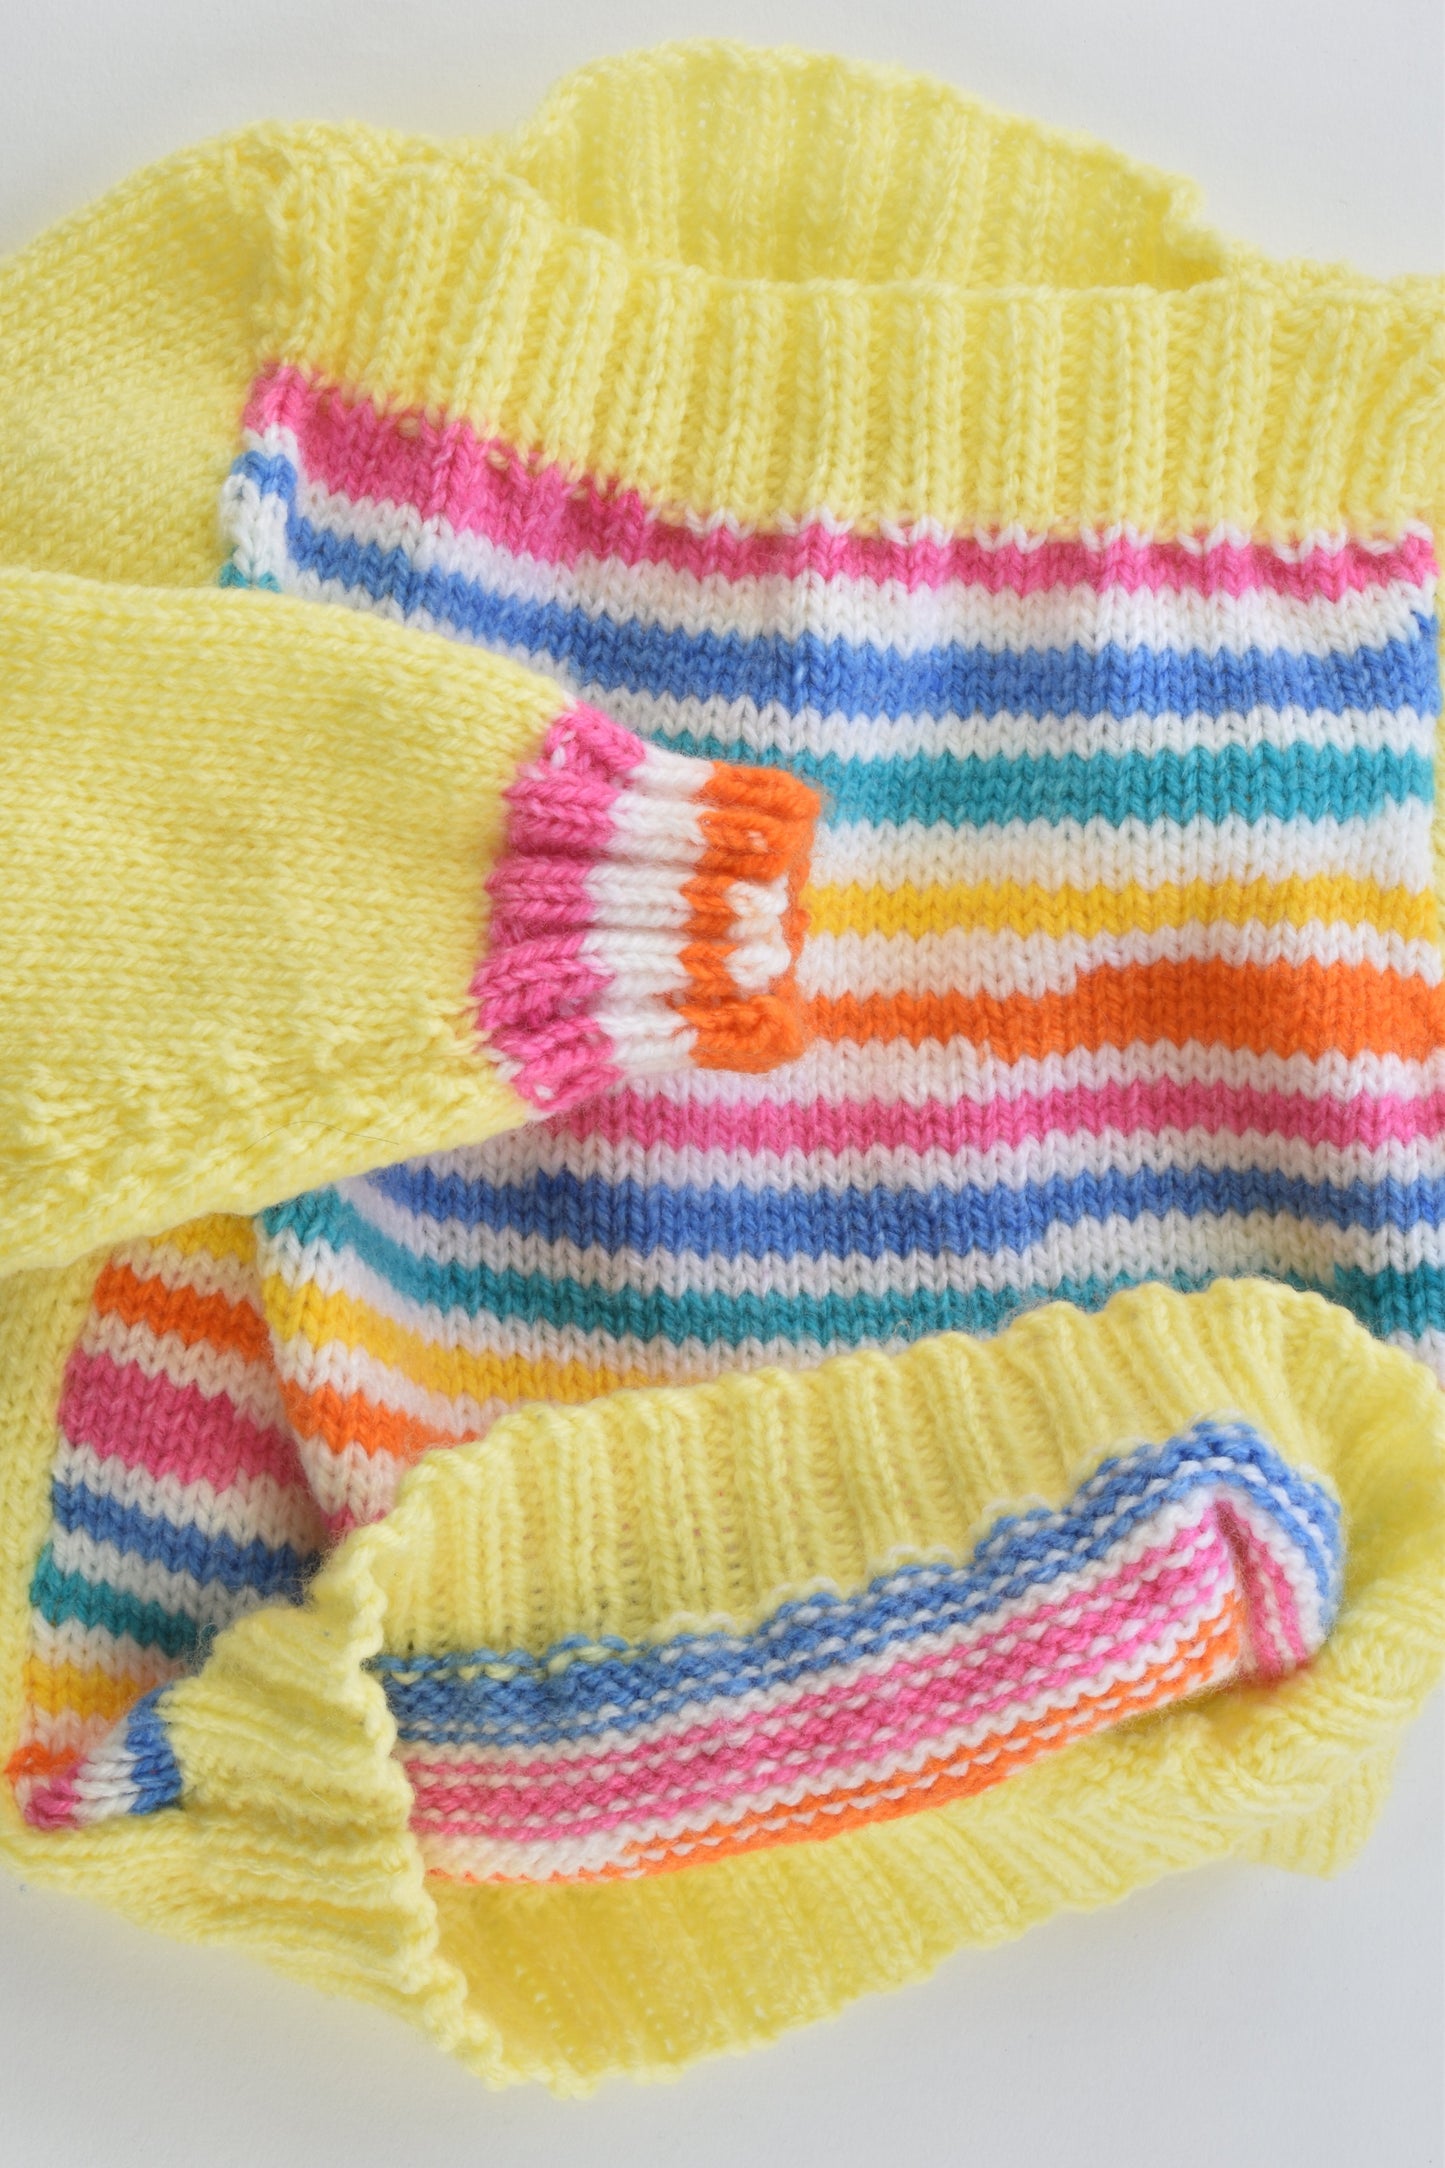 Handmade Size approx 1 Colorful Stripes Knitted Jumper